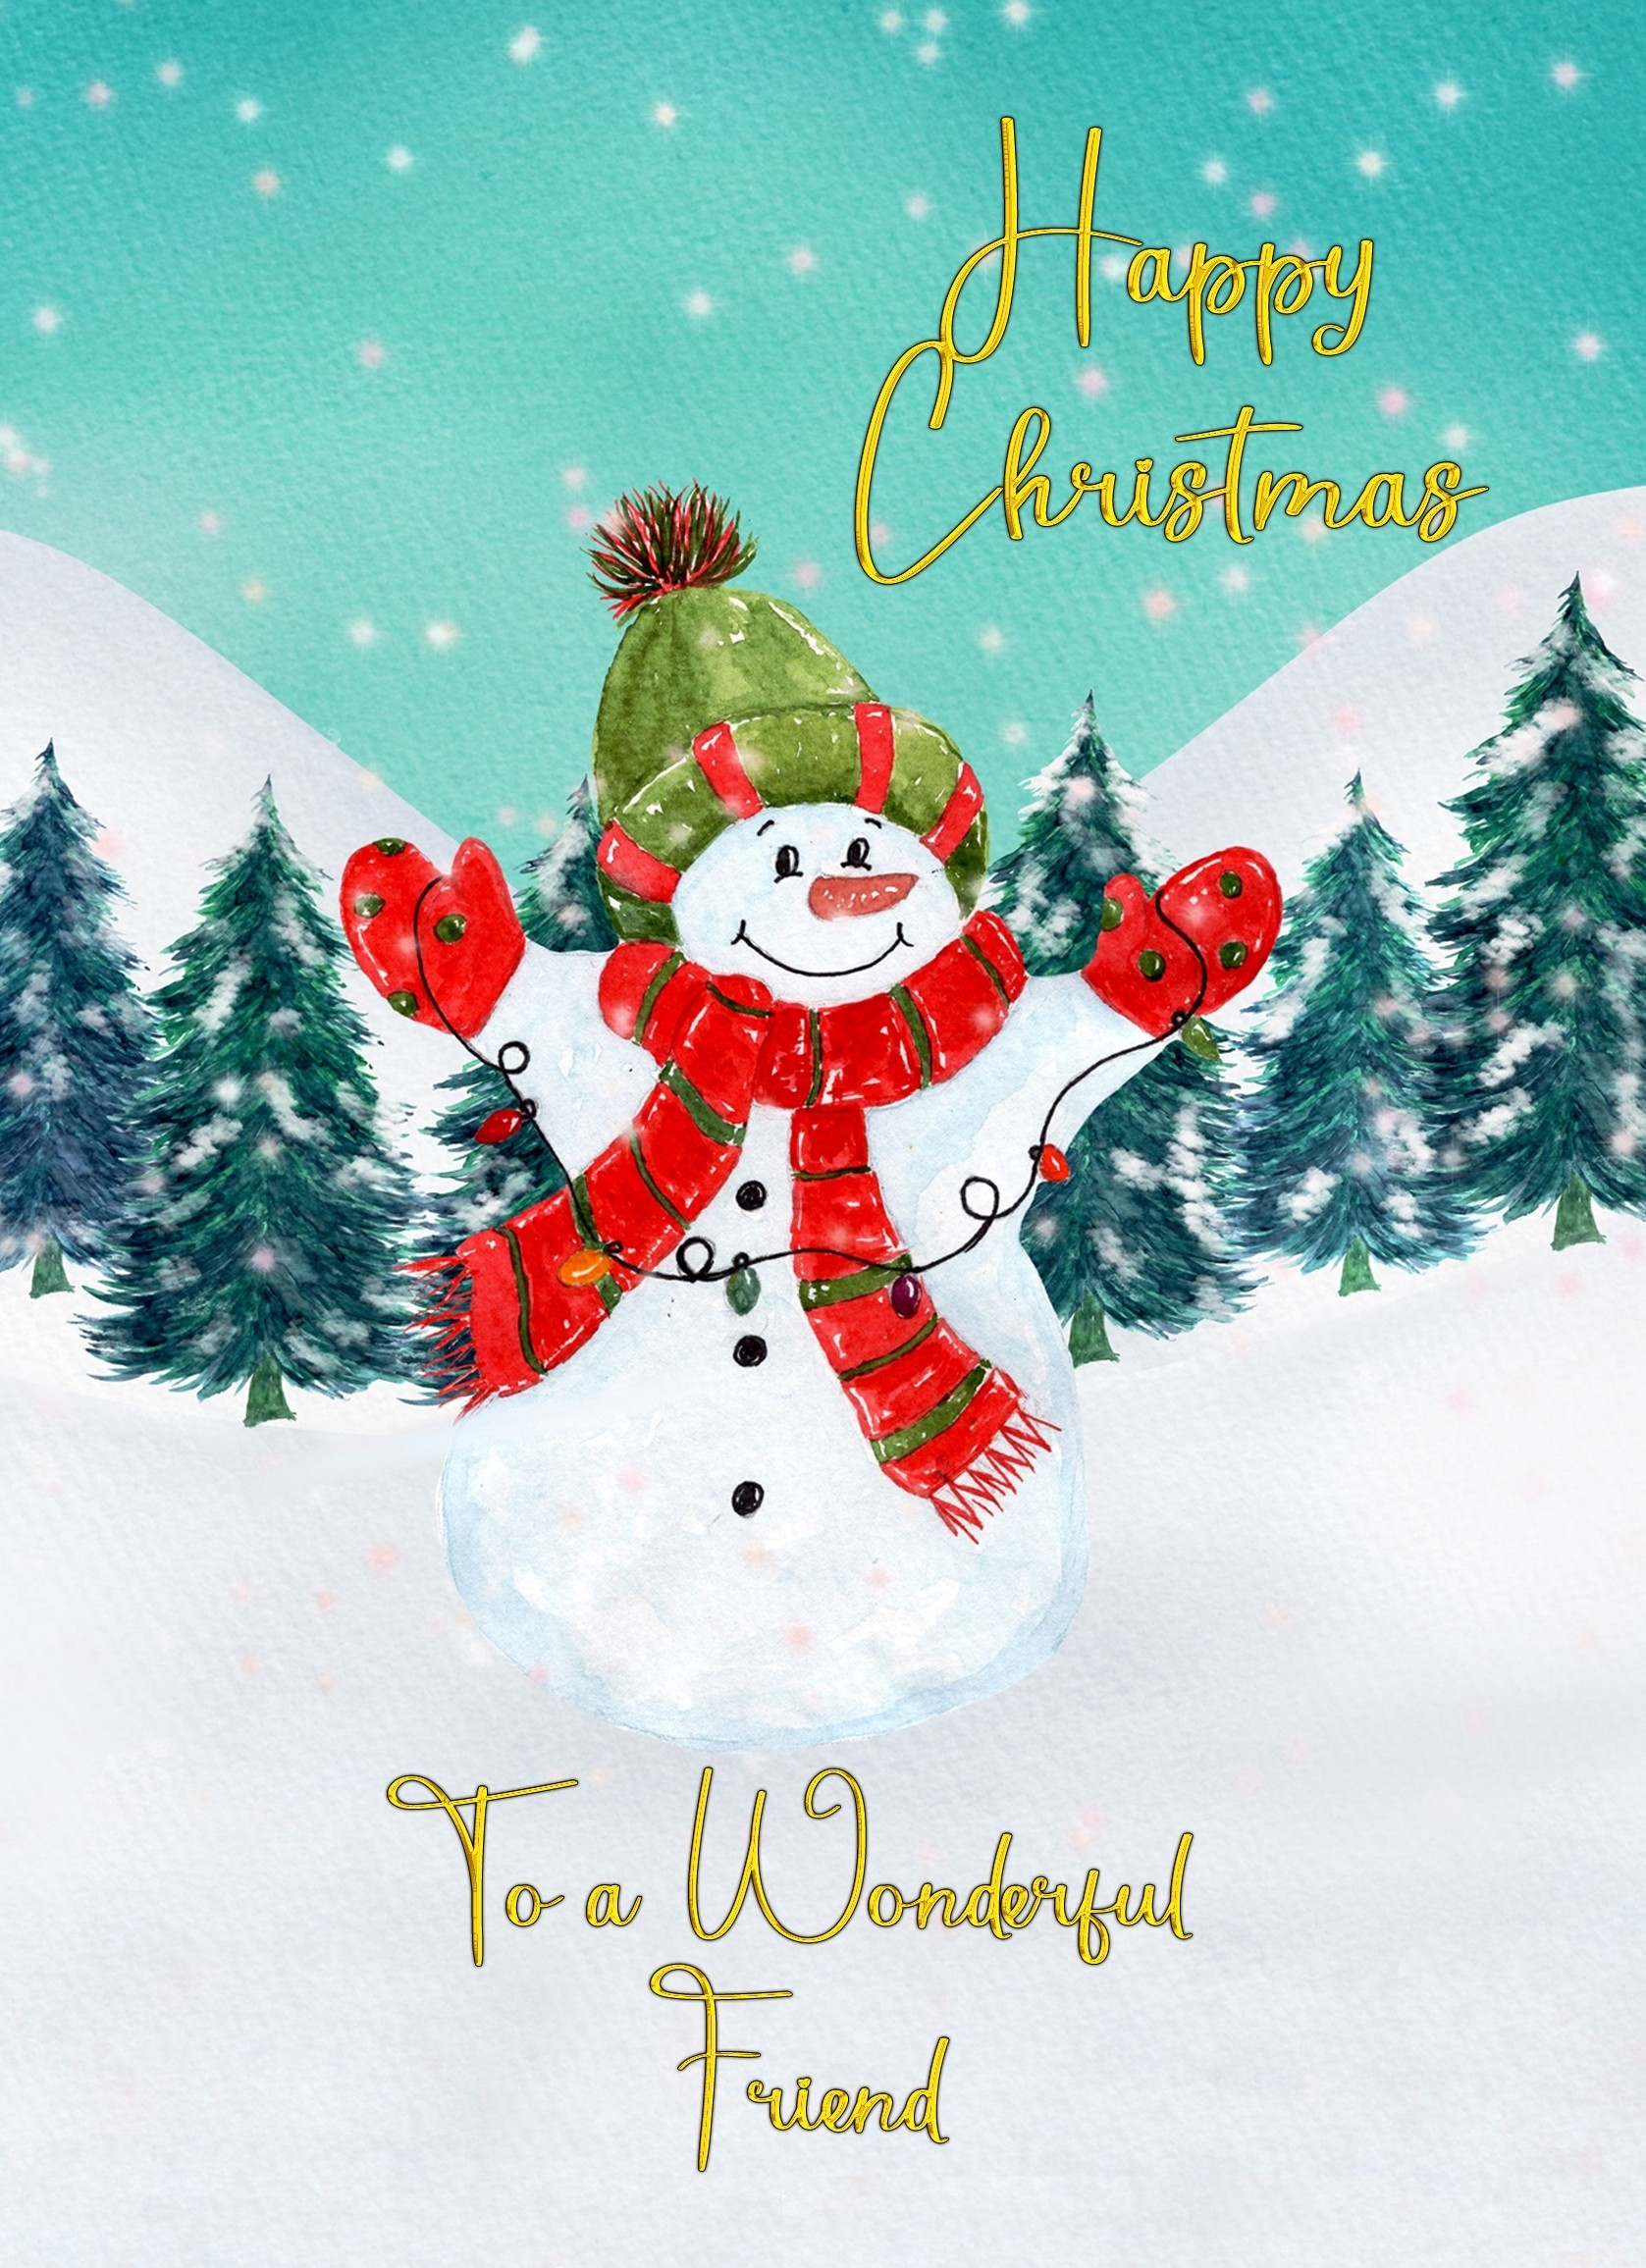 Christmas Card For Special Friend (Snowman)